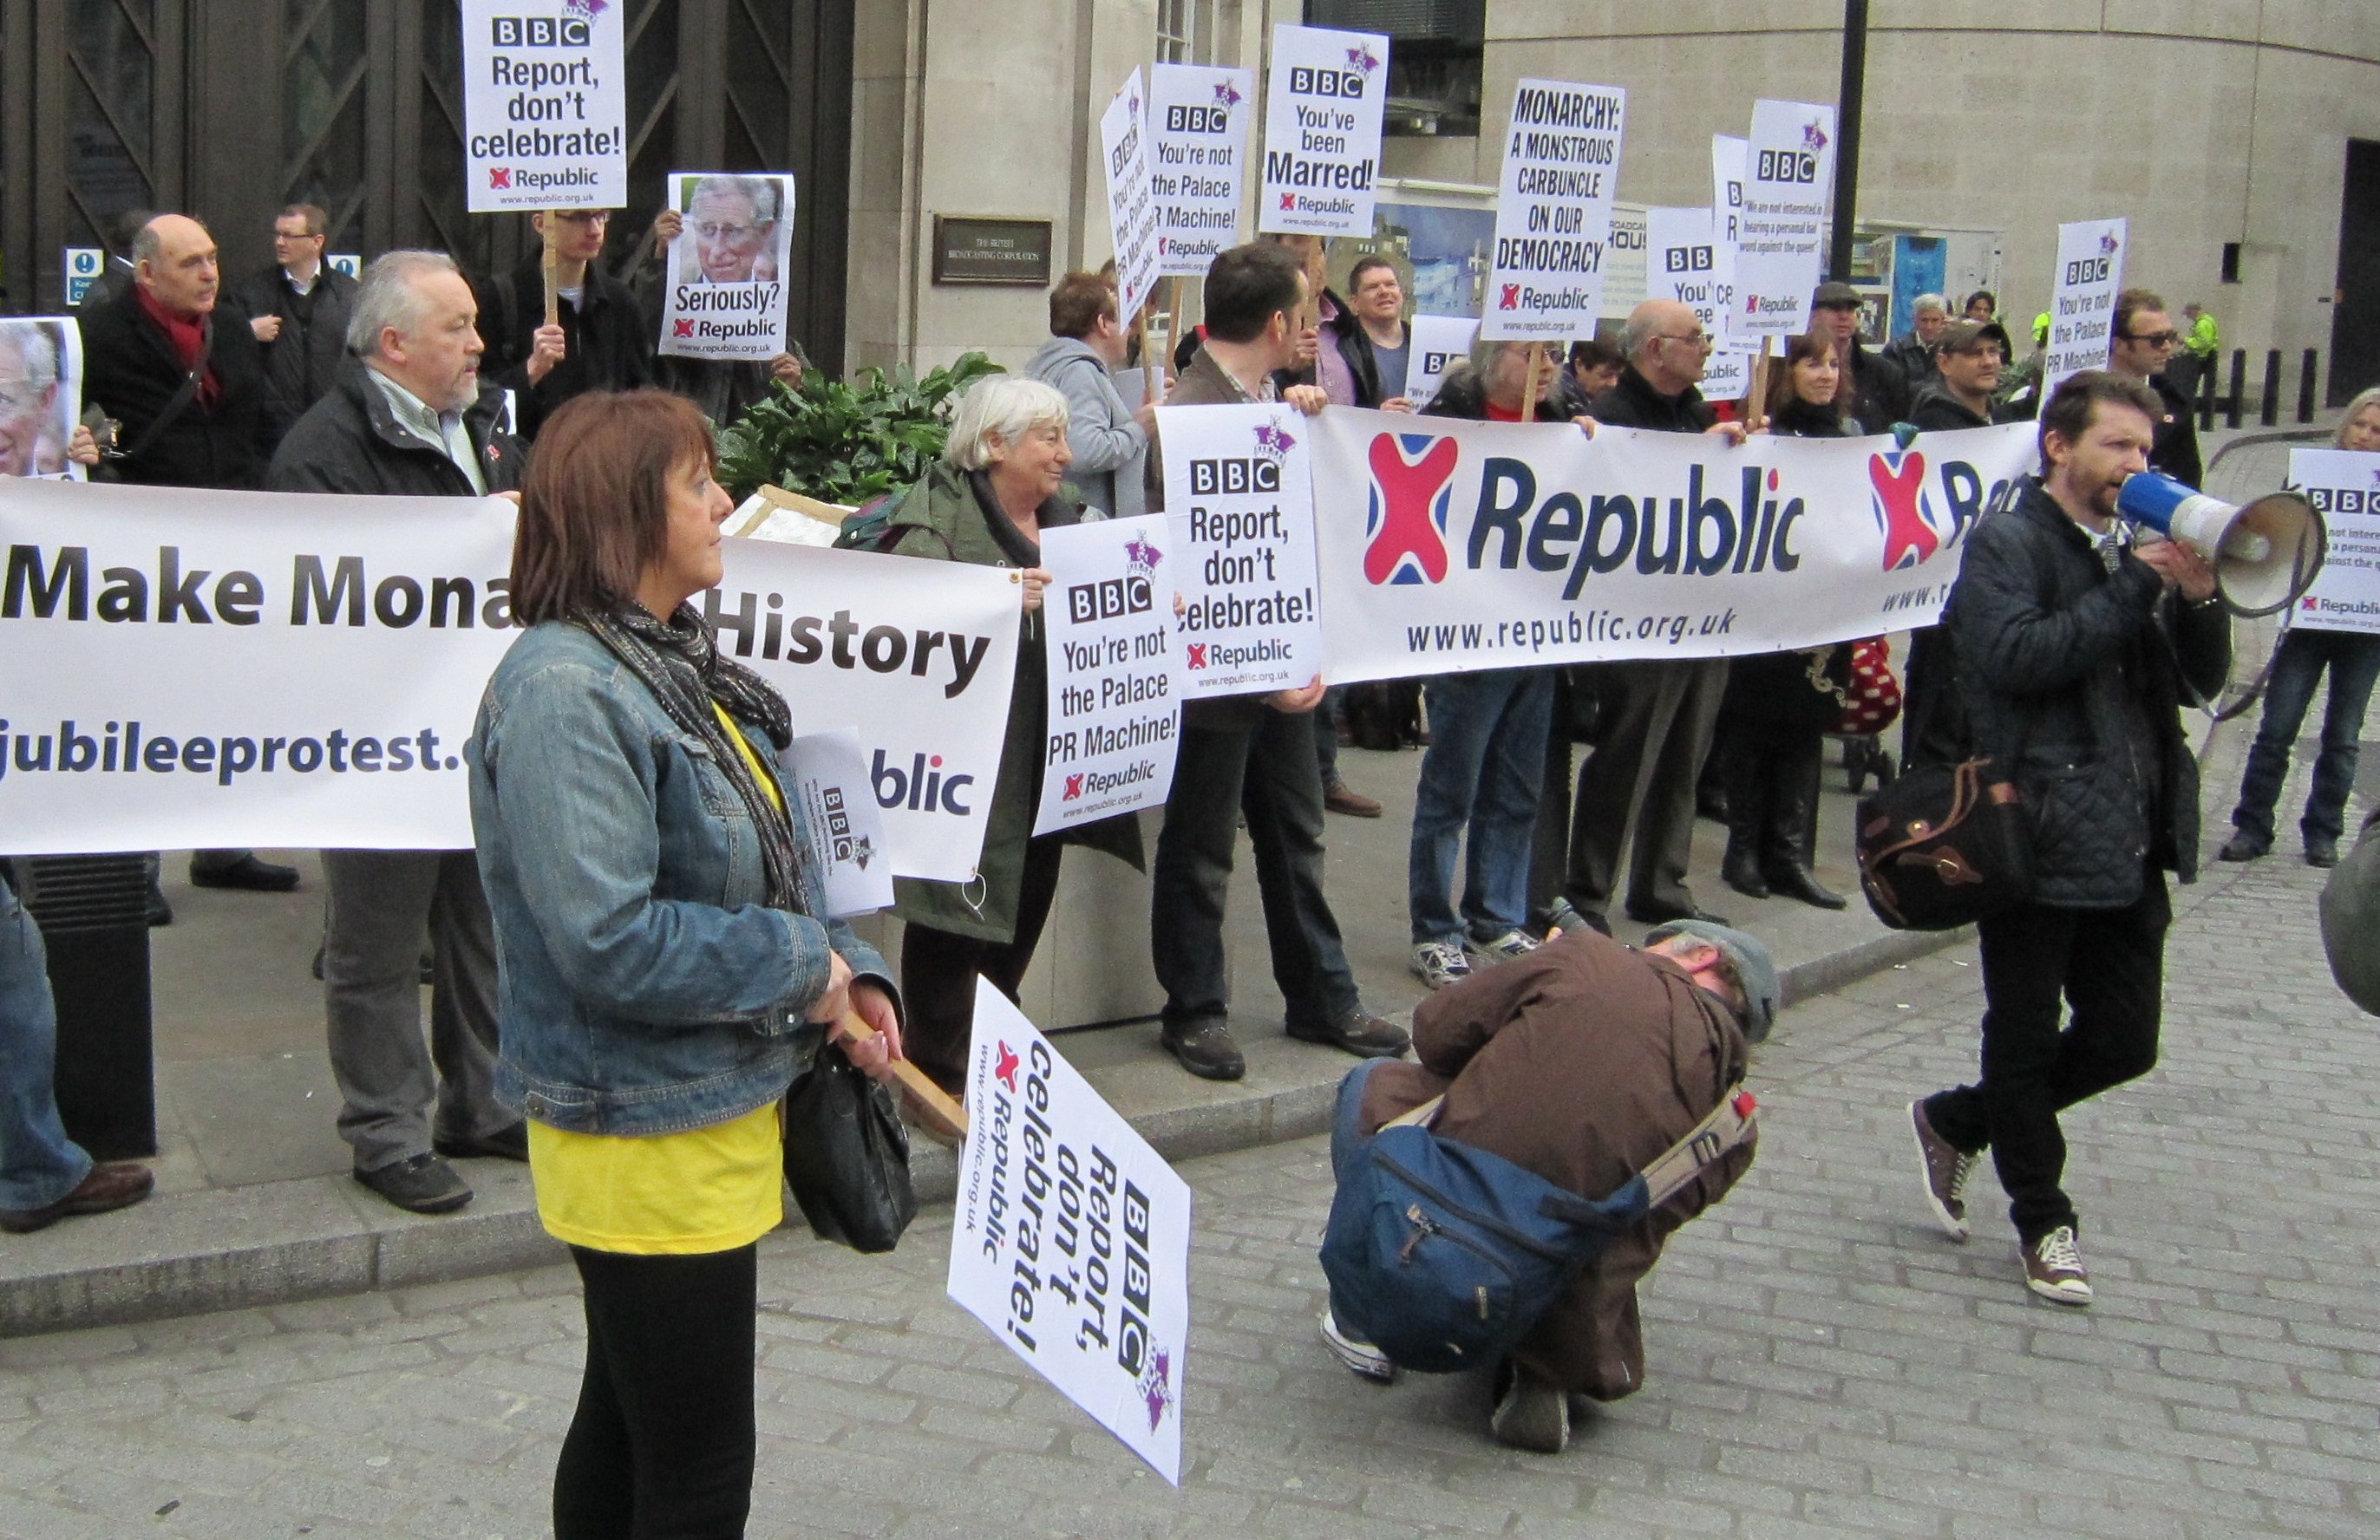 Members of anti-monarchy group protesting outside Broadcasting House.